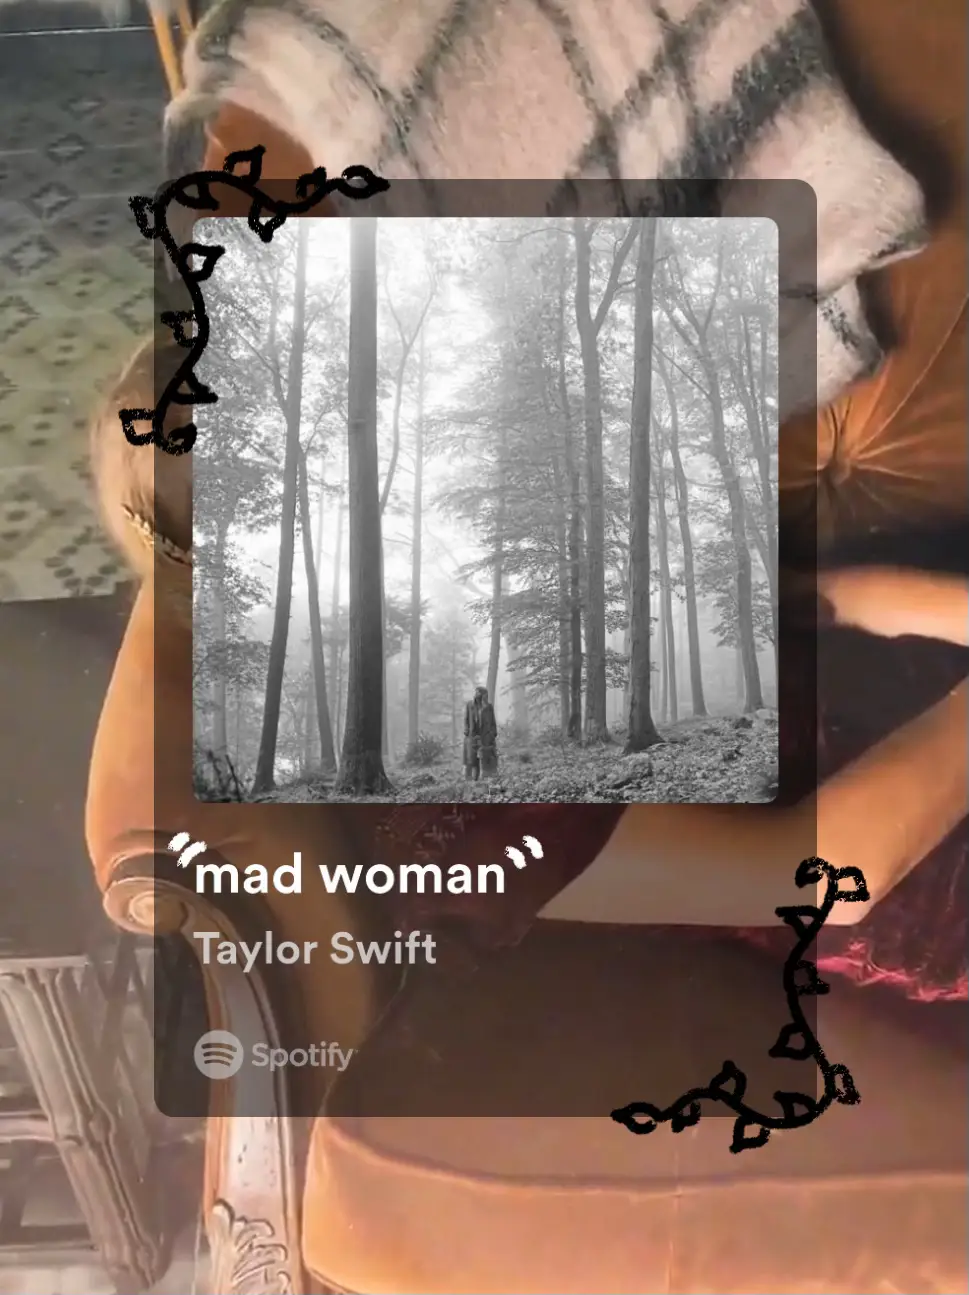  A Spotify ad for Taylor Swift's song "Mad woman".